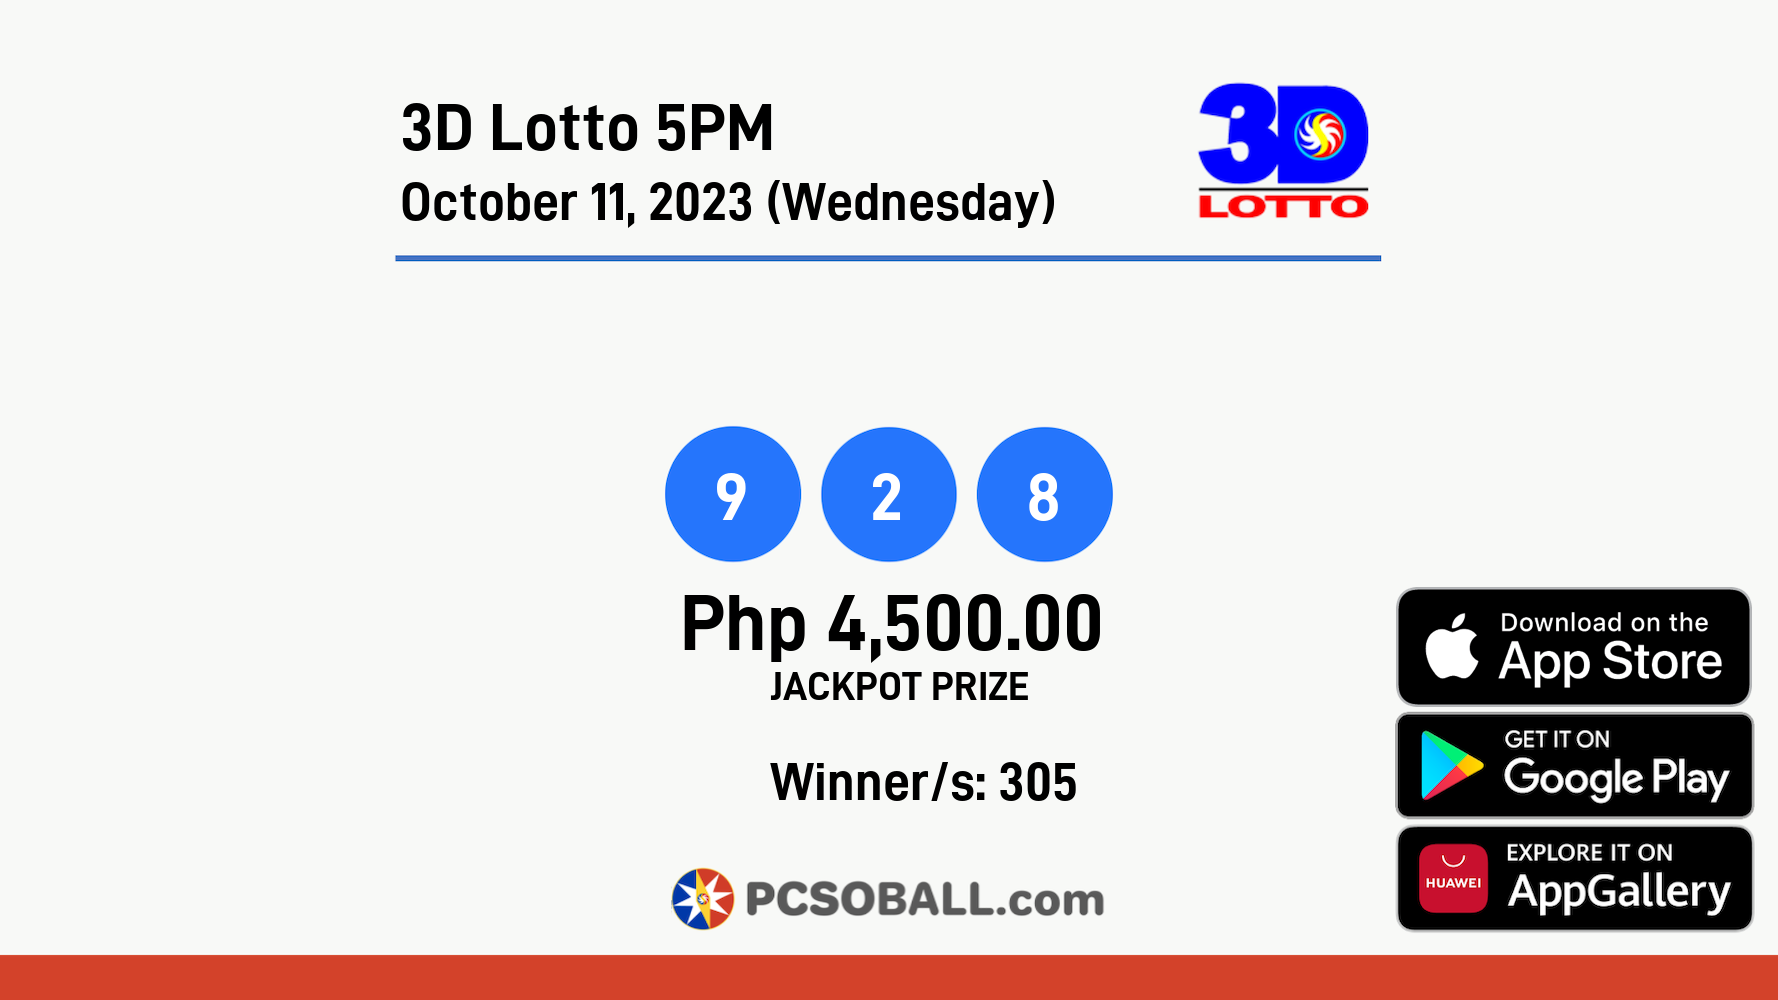 3D Lotto 5PM October 11, 2023 (Wednesday) Result